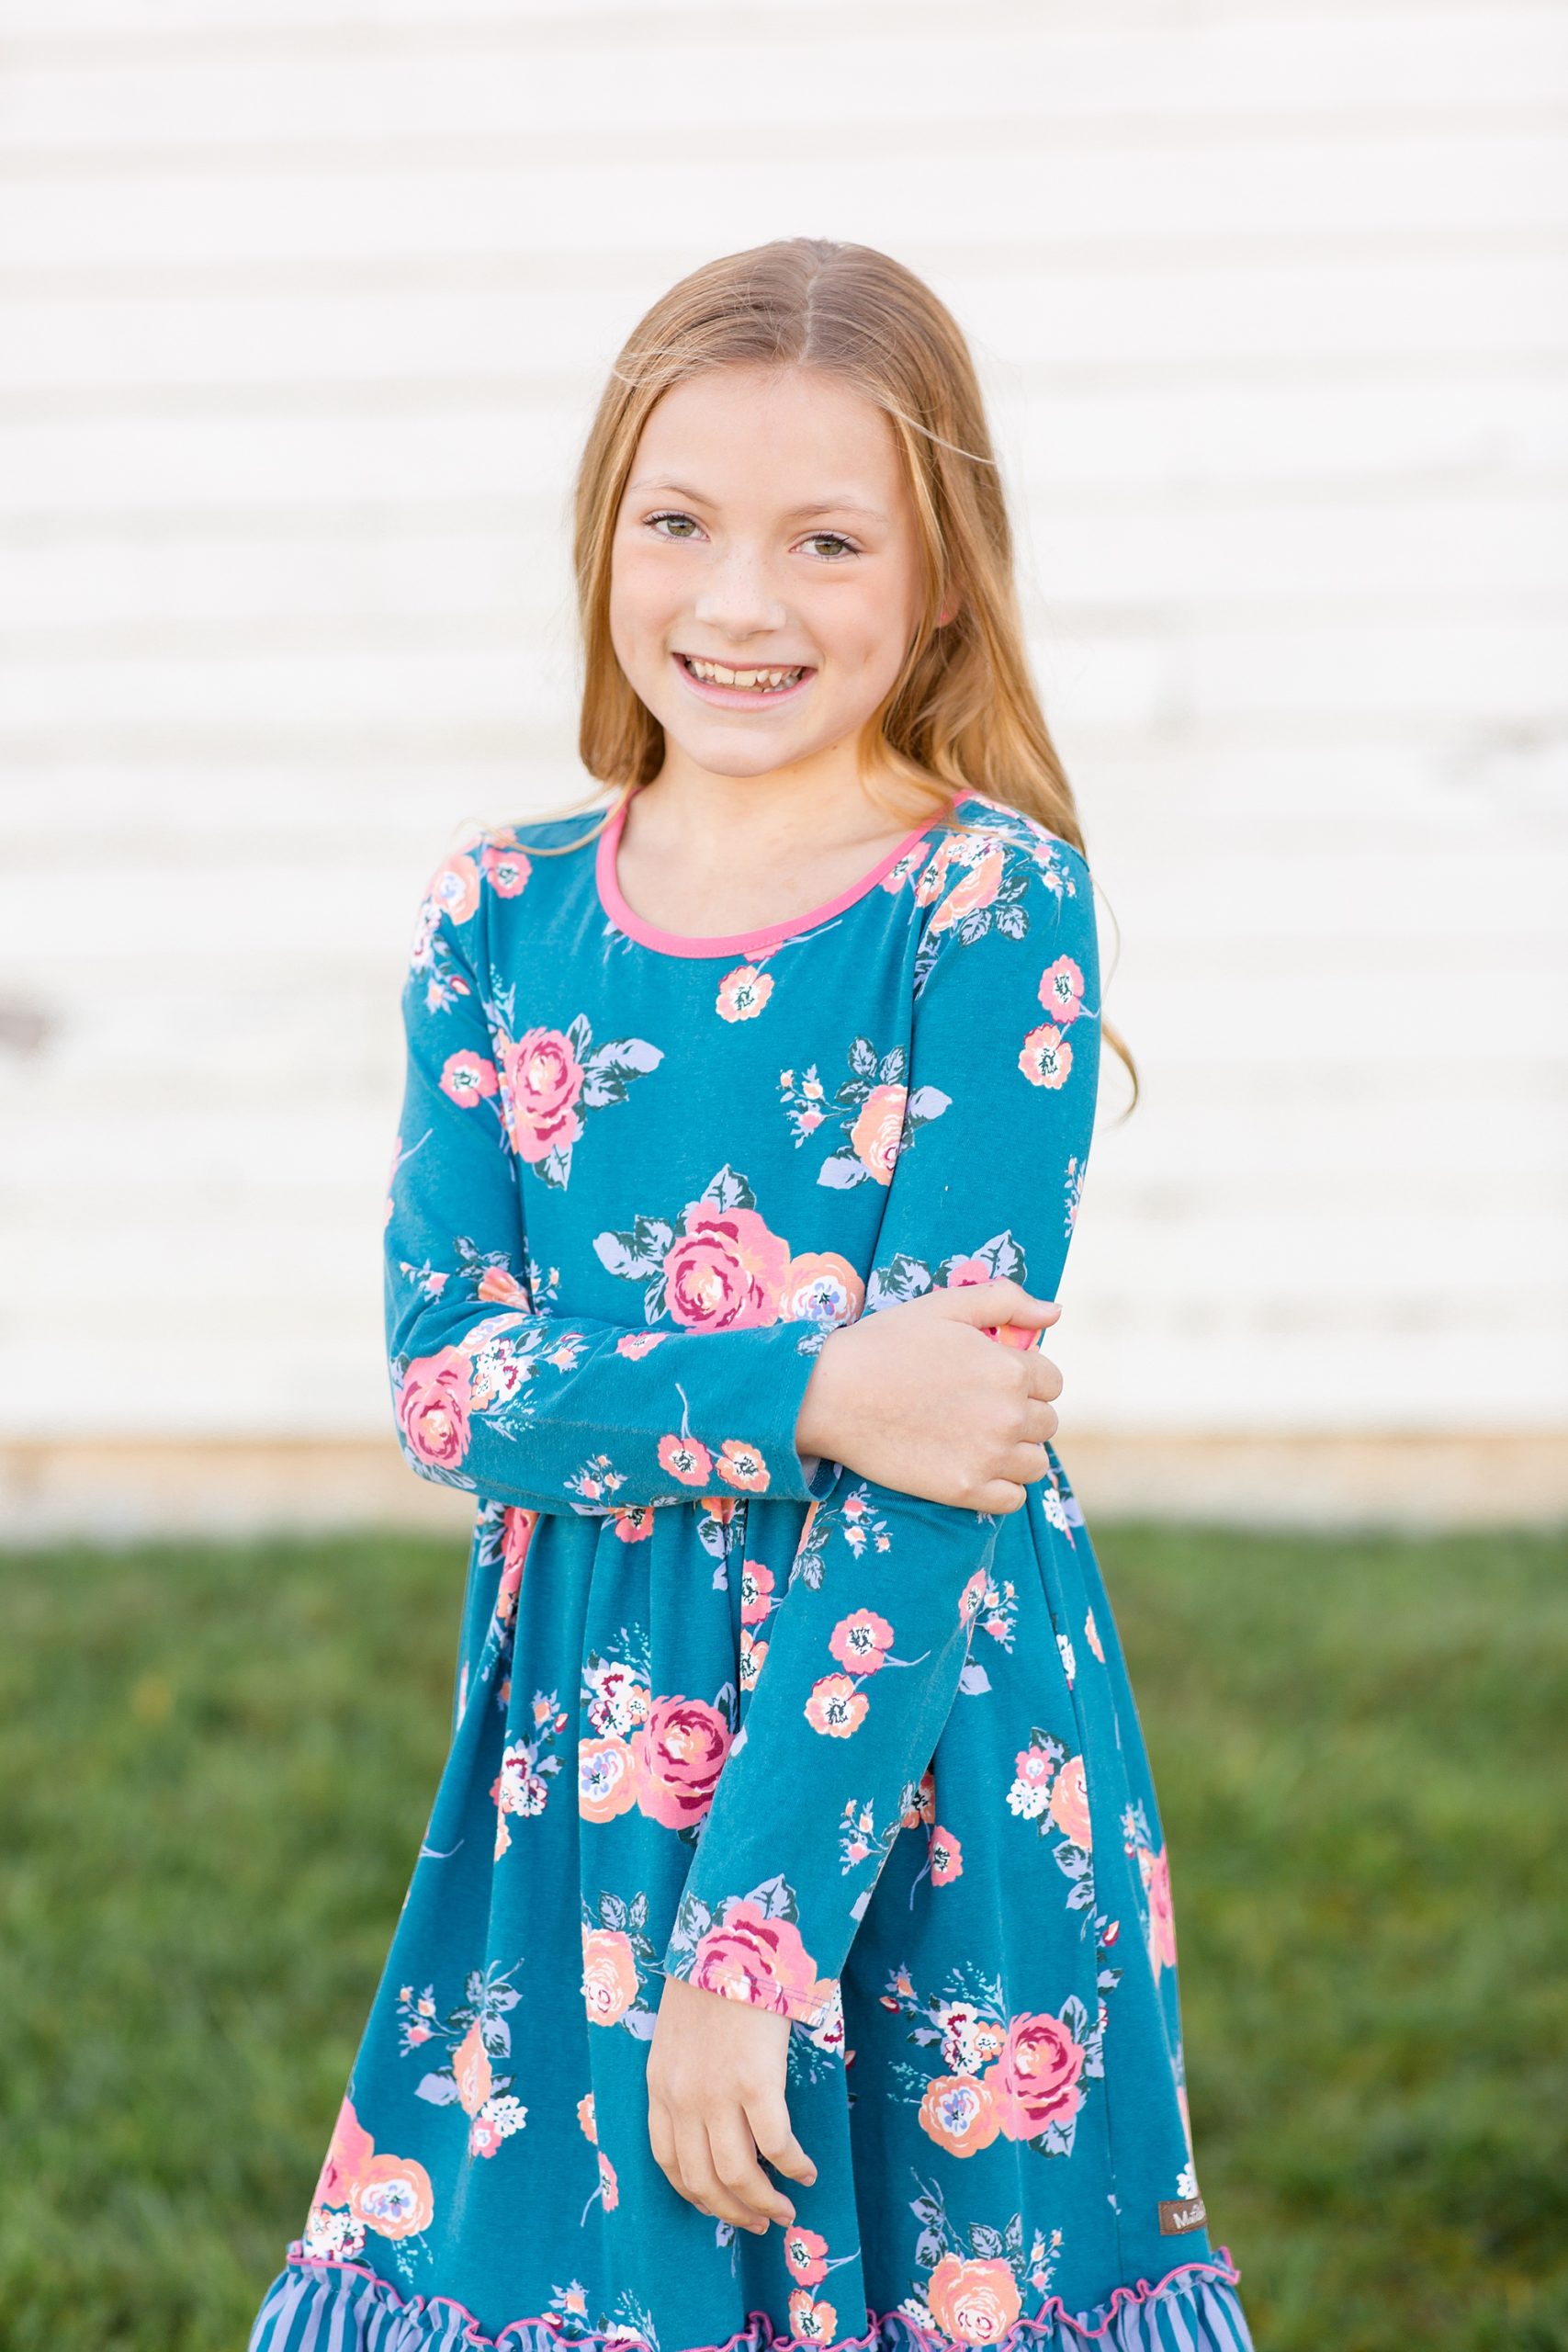 daughter in floral dress poses by white barn